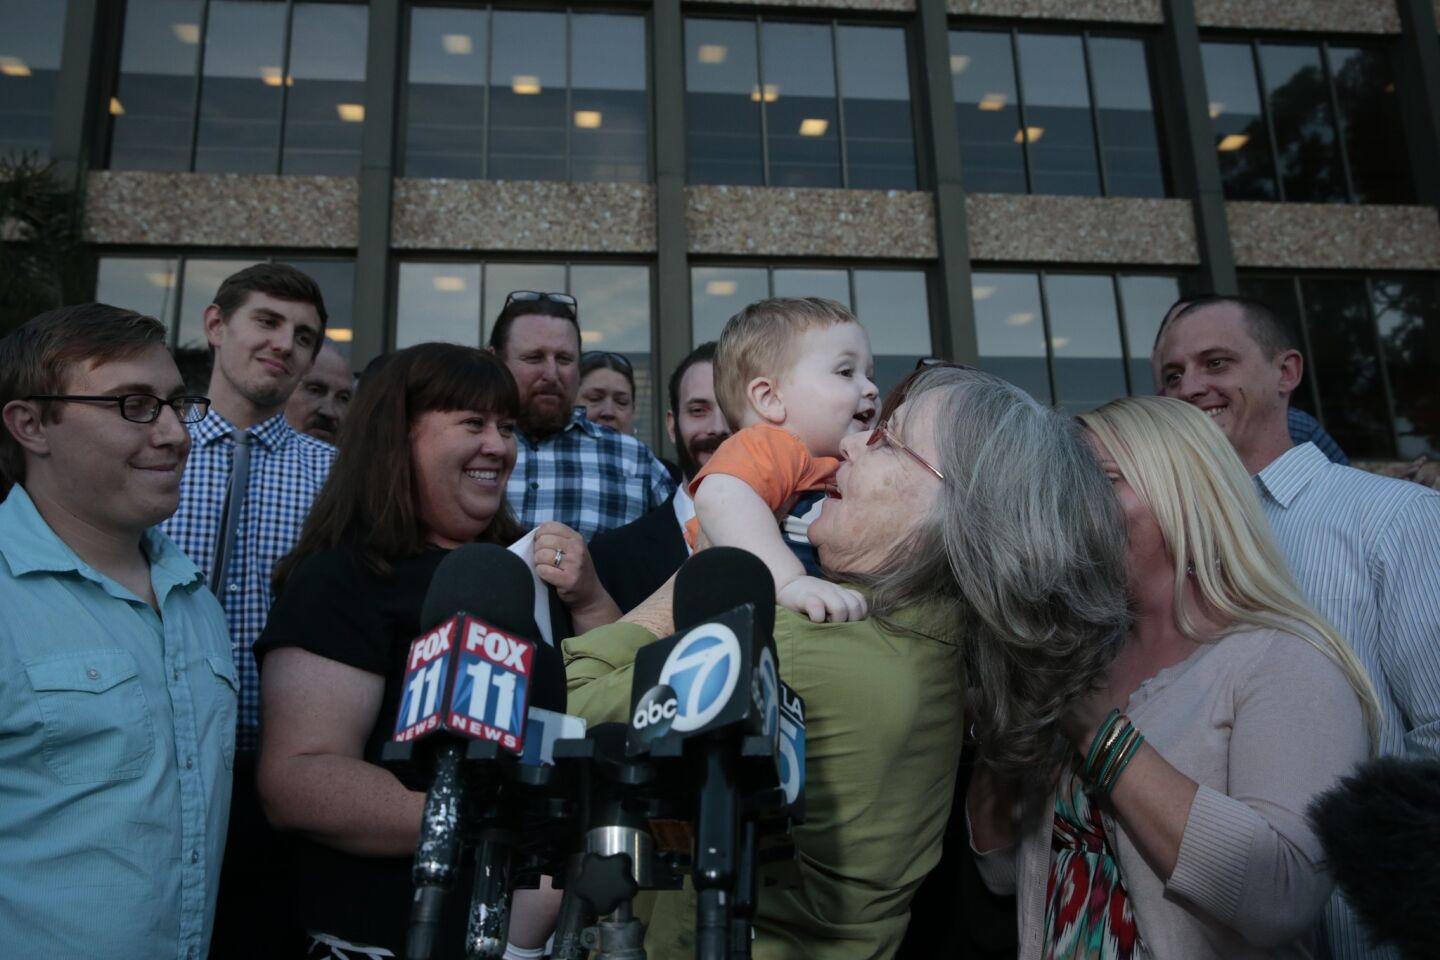 Susan Mellen holds her grandson for the first time after she was released after 17 years in prison.